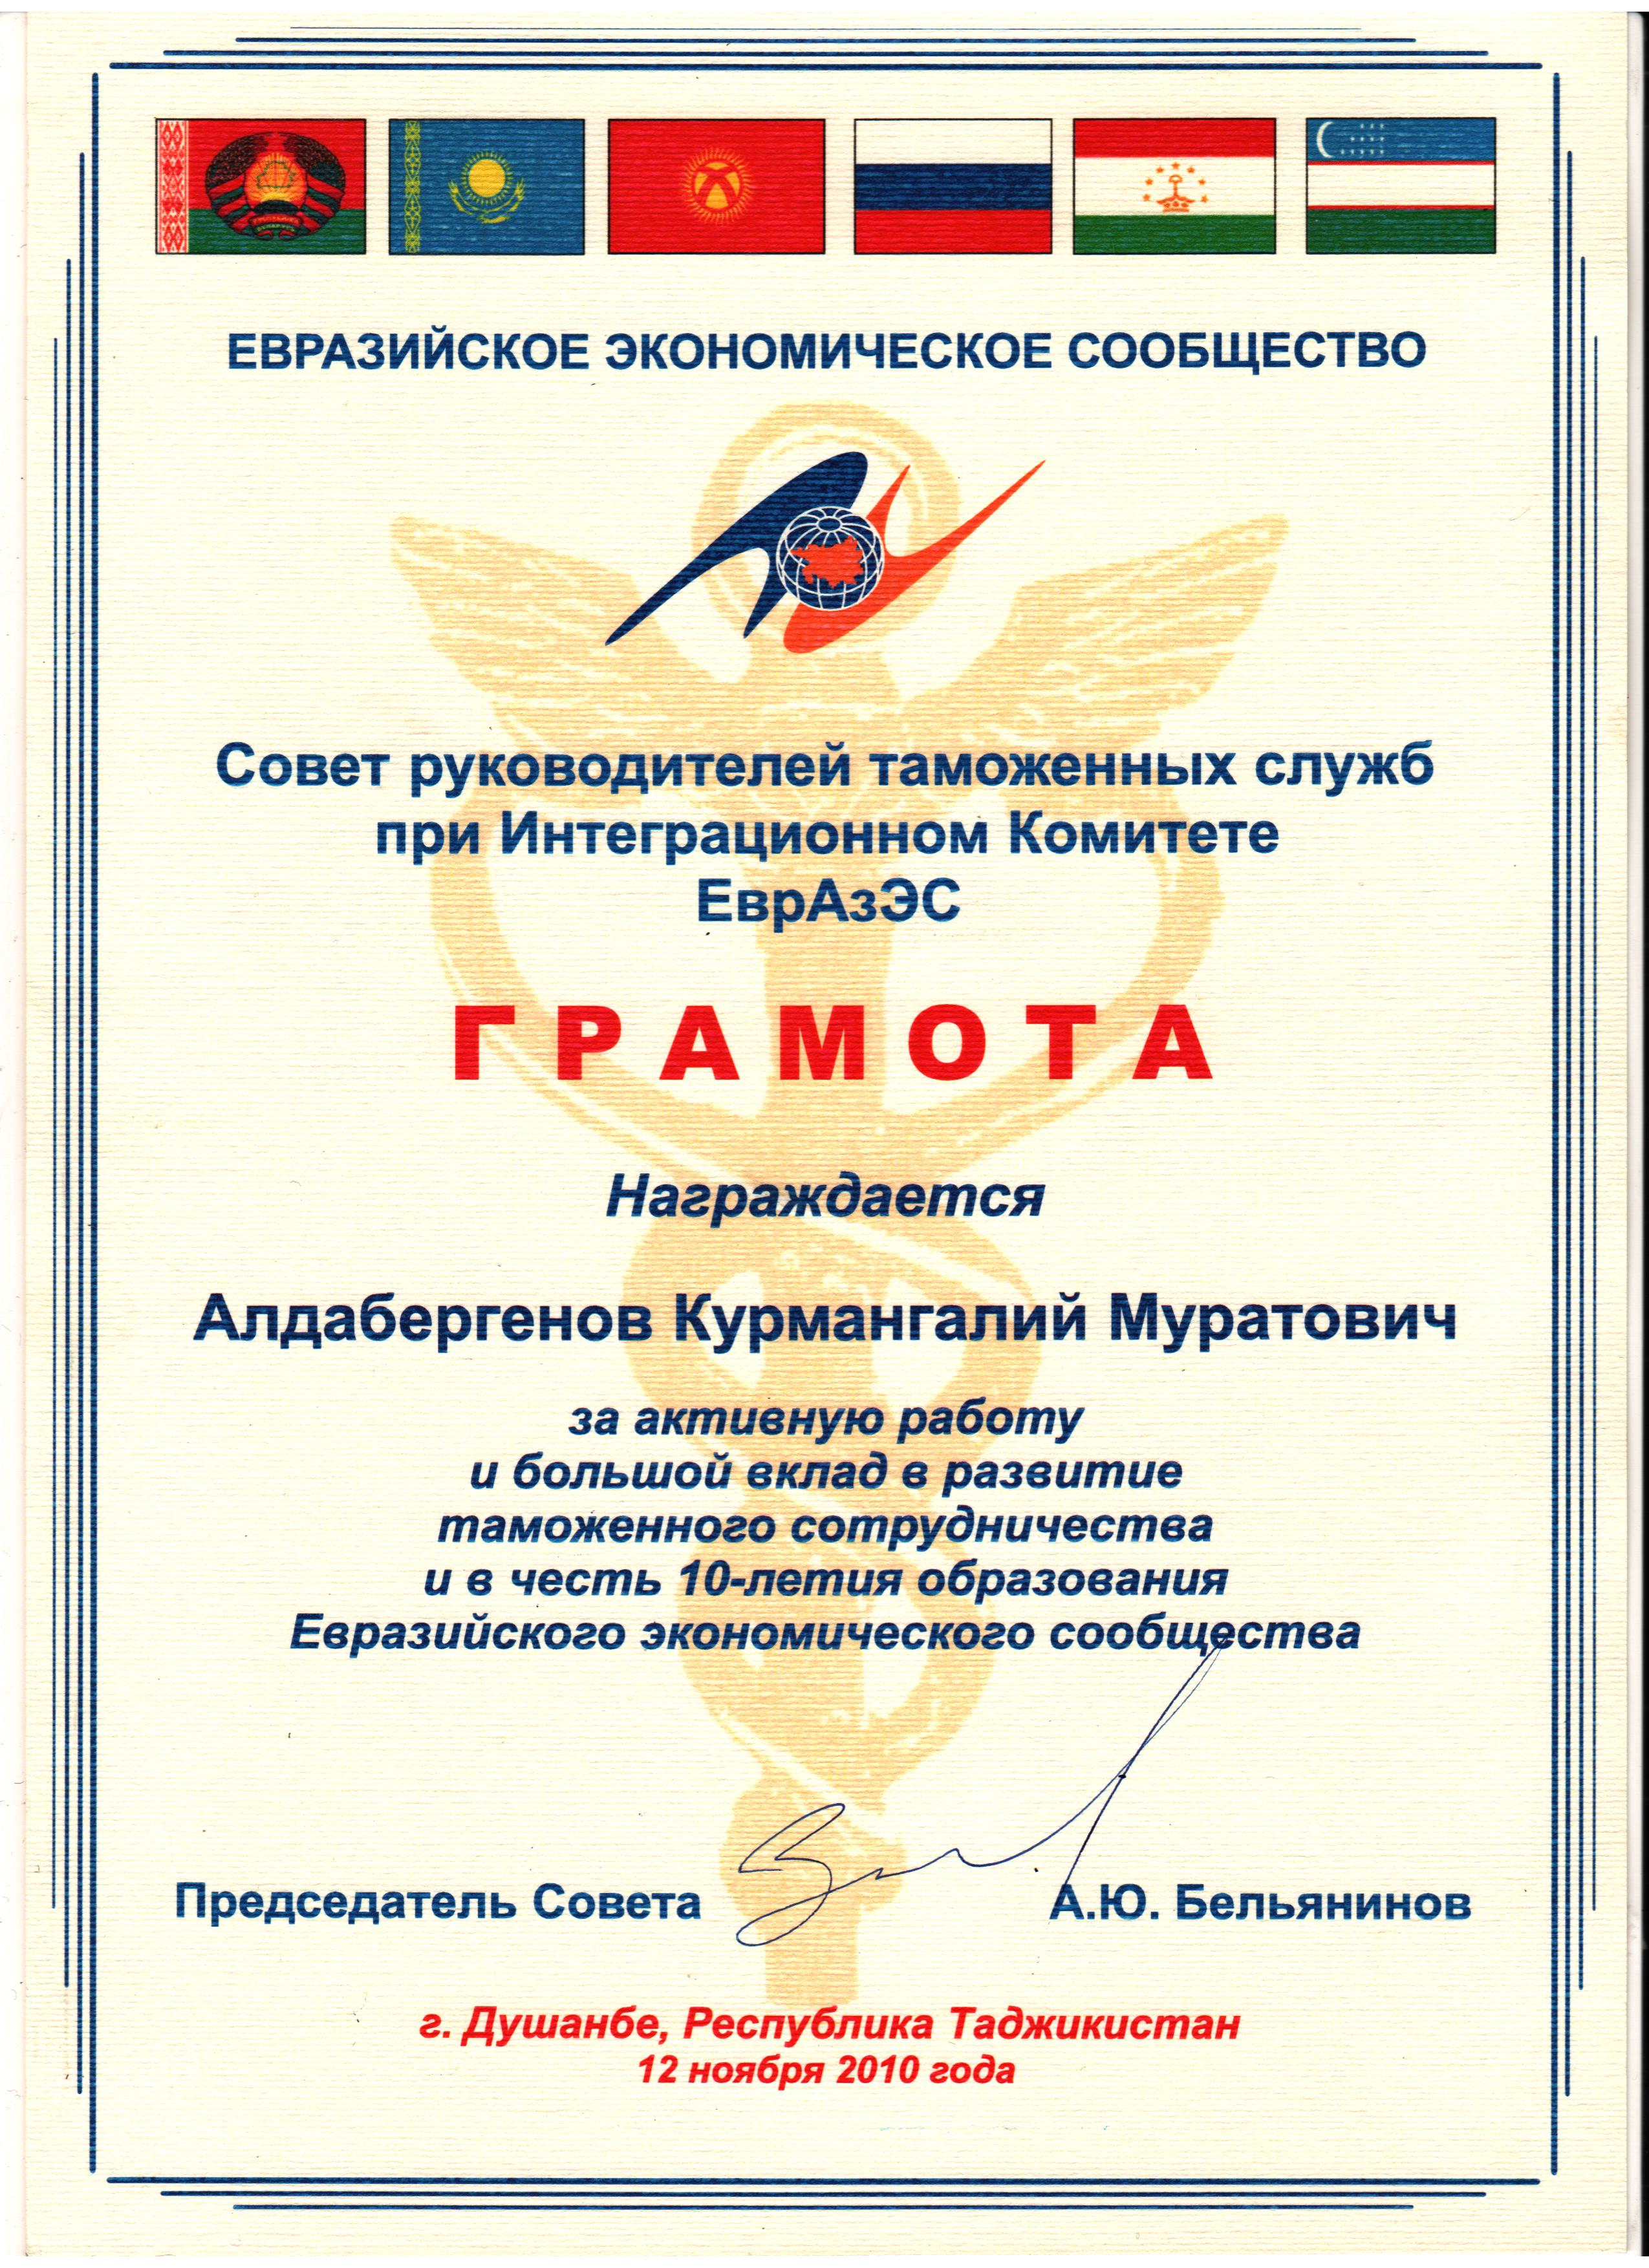 Certificate of appreciation from the Council of the Heads of Customs Services under the Integration Committee of EurAsEC